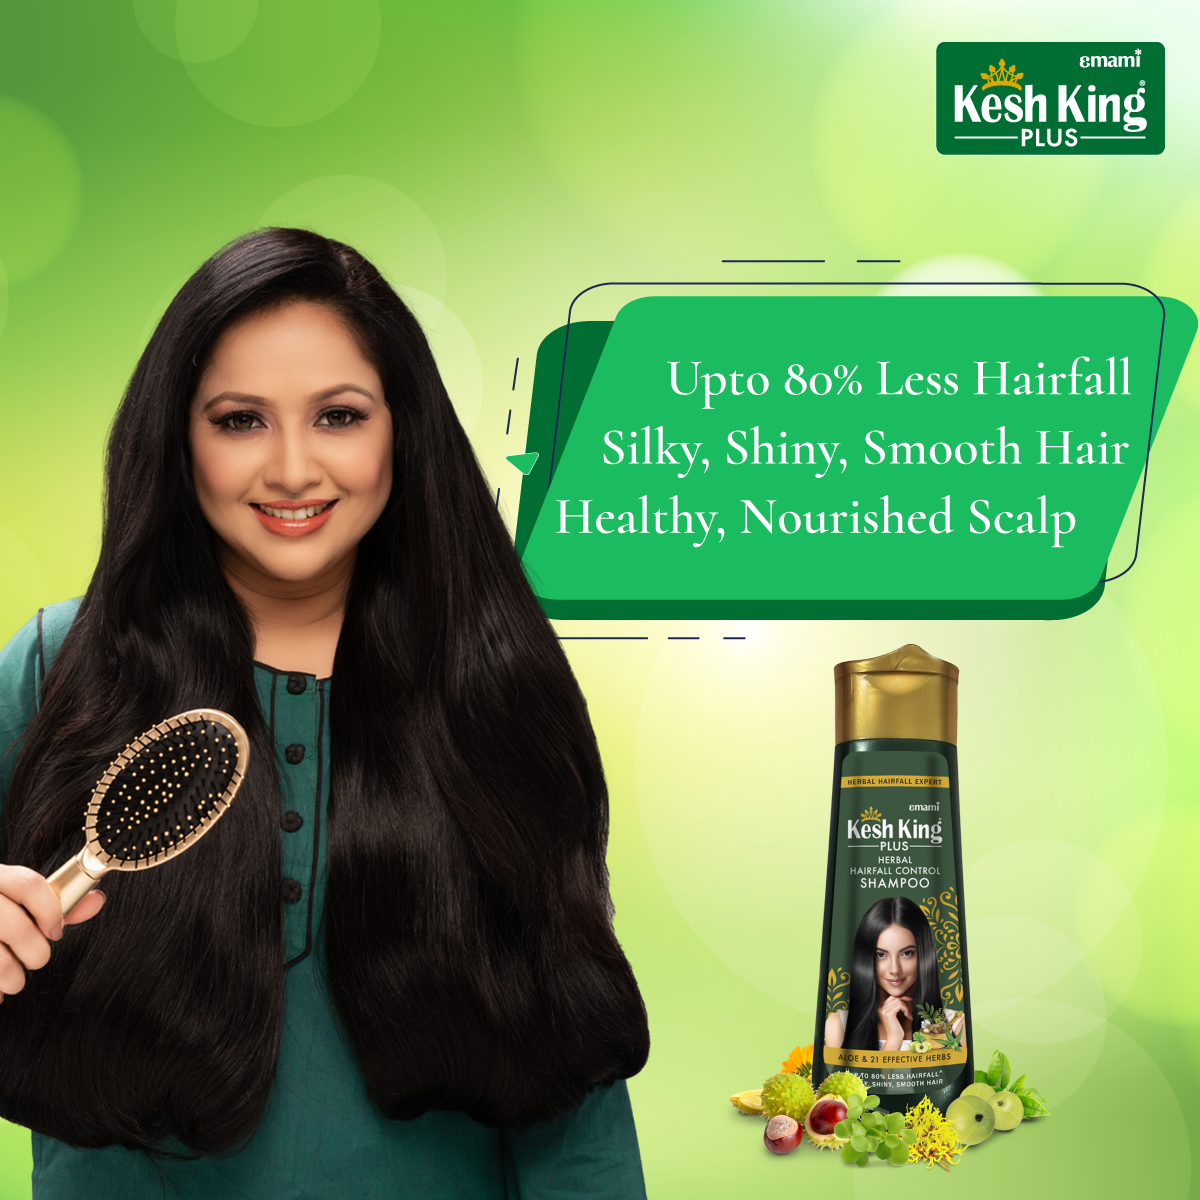 Kesh King Ayurvedic Hair Oil Review – Is It Really a One-Stop Solution? –  ootdiva